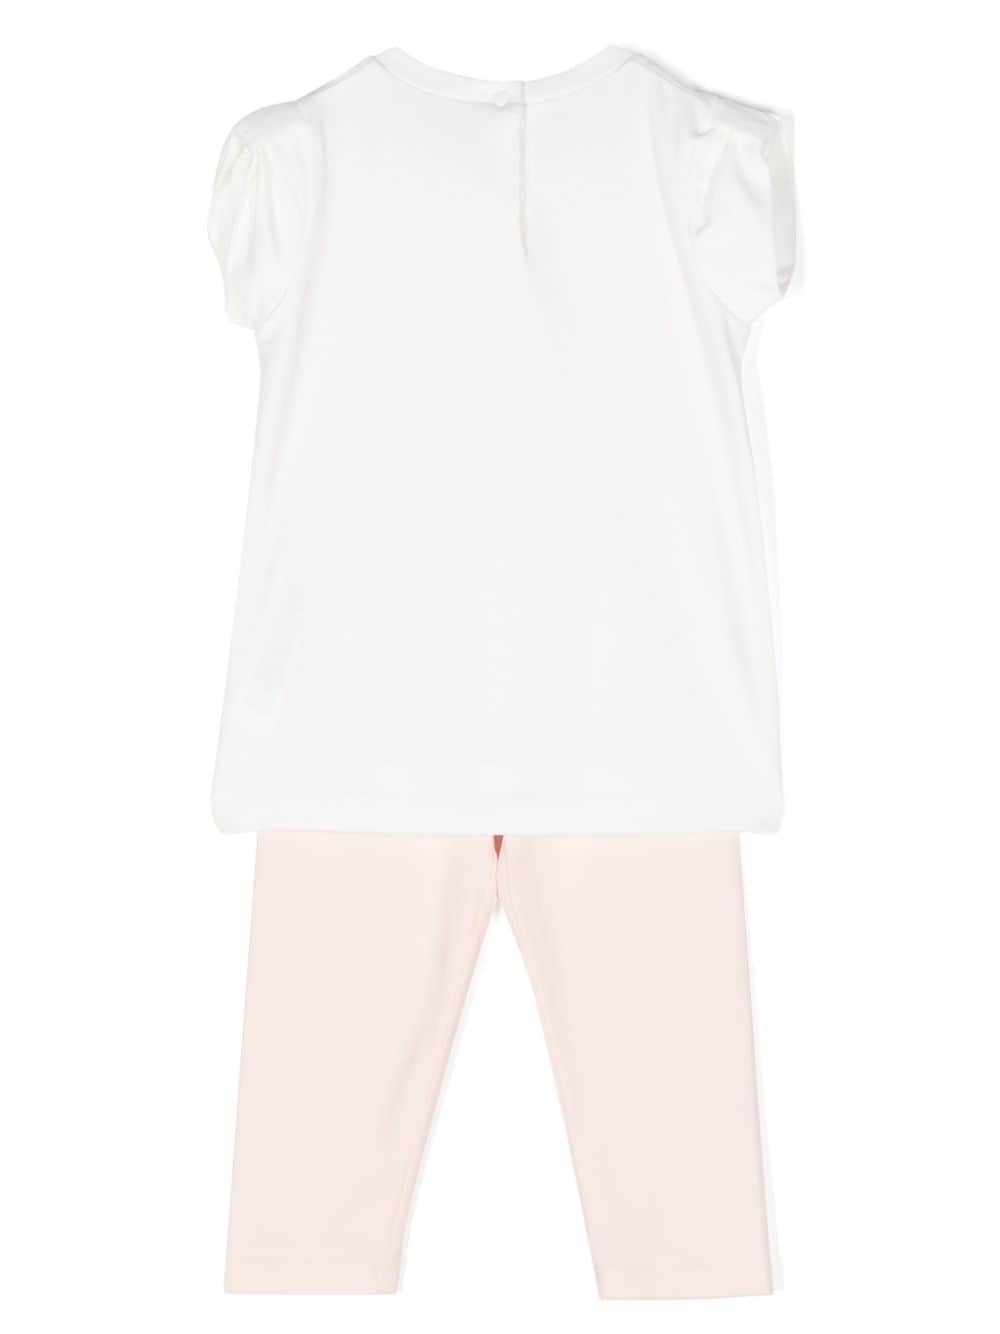 White and pink sports outfit for baby girls